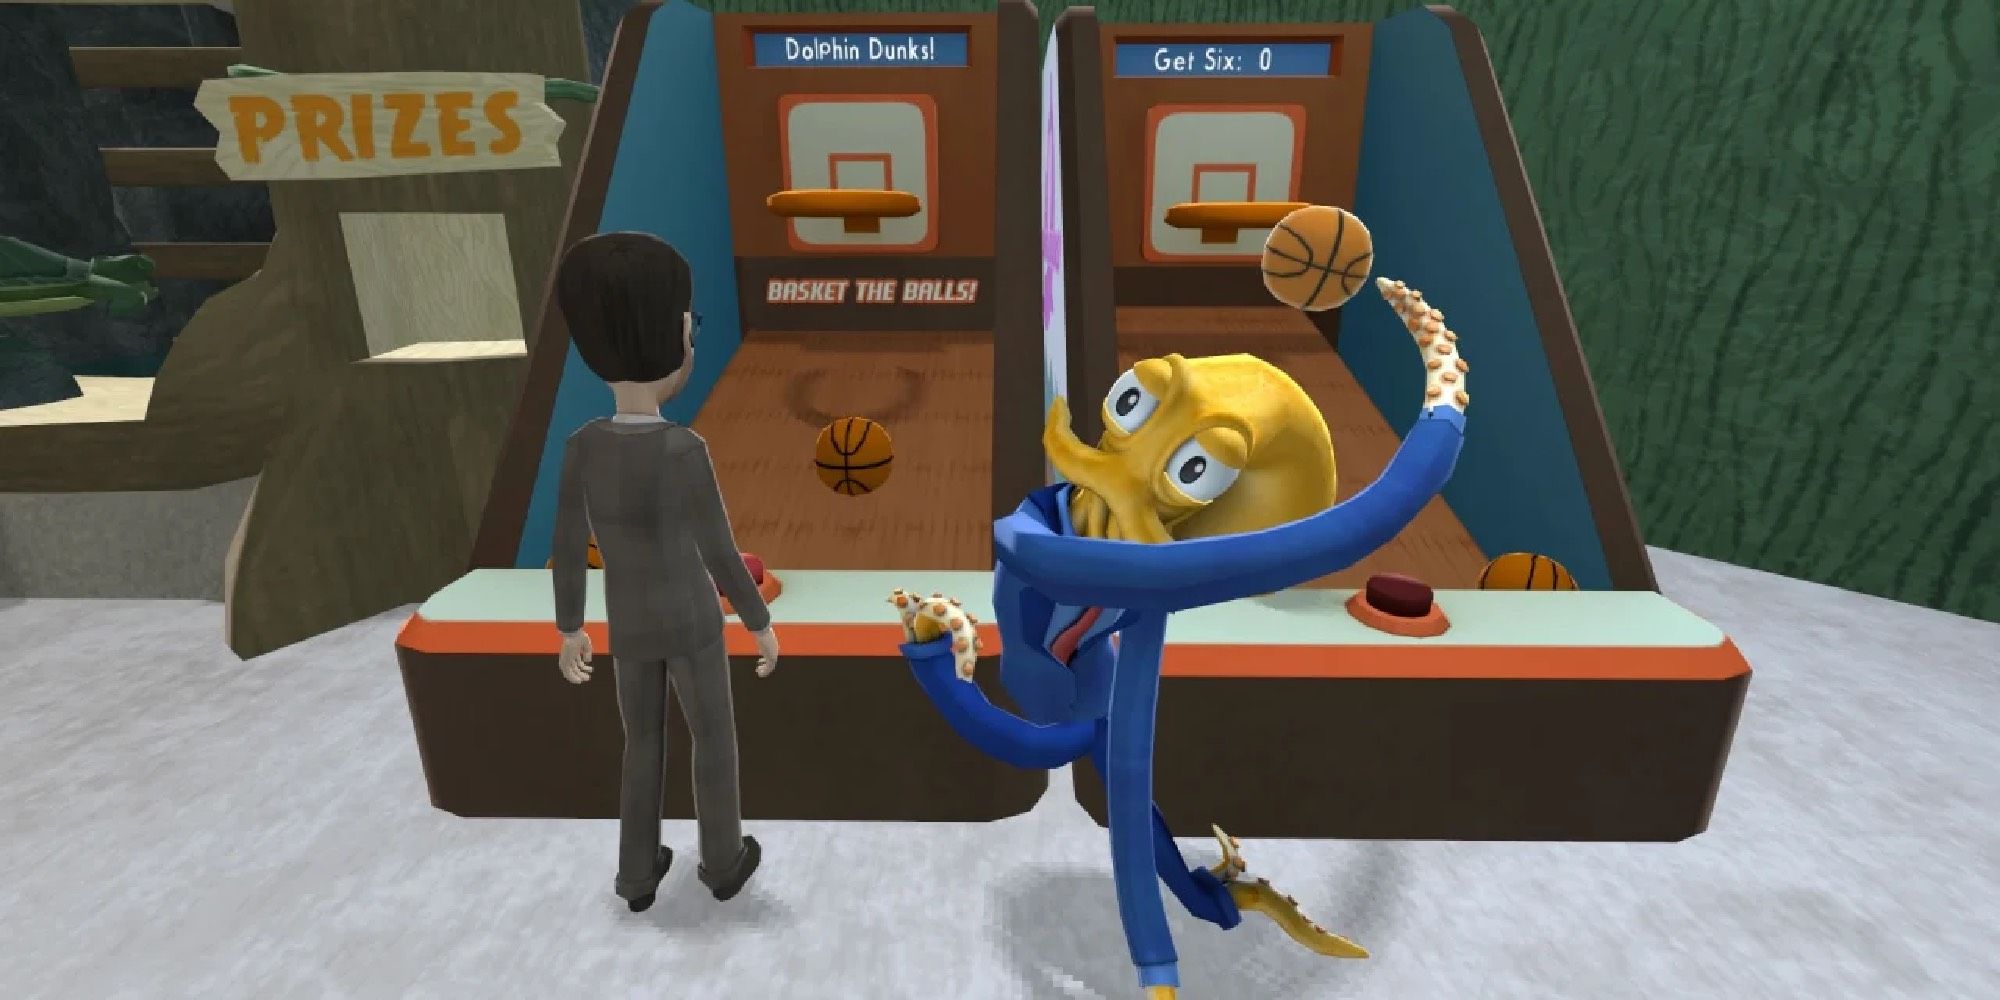 Octopus in a suit throwing a basketball at an arcade game